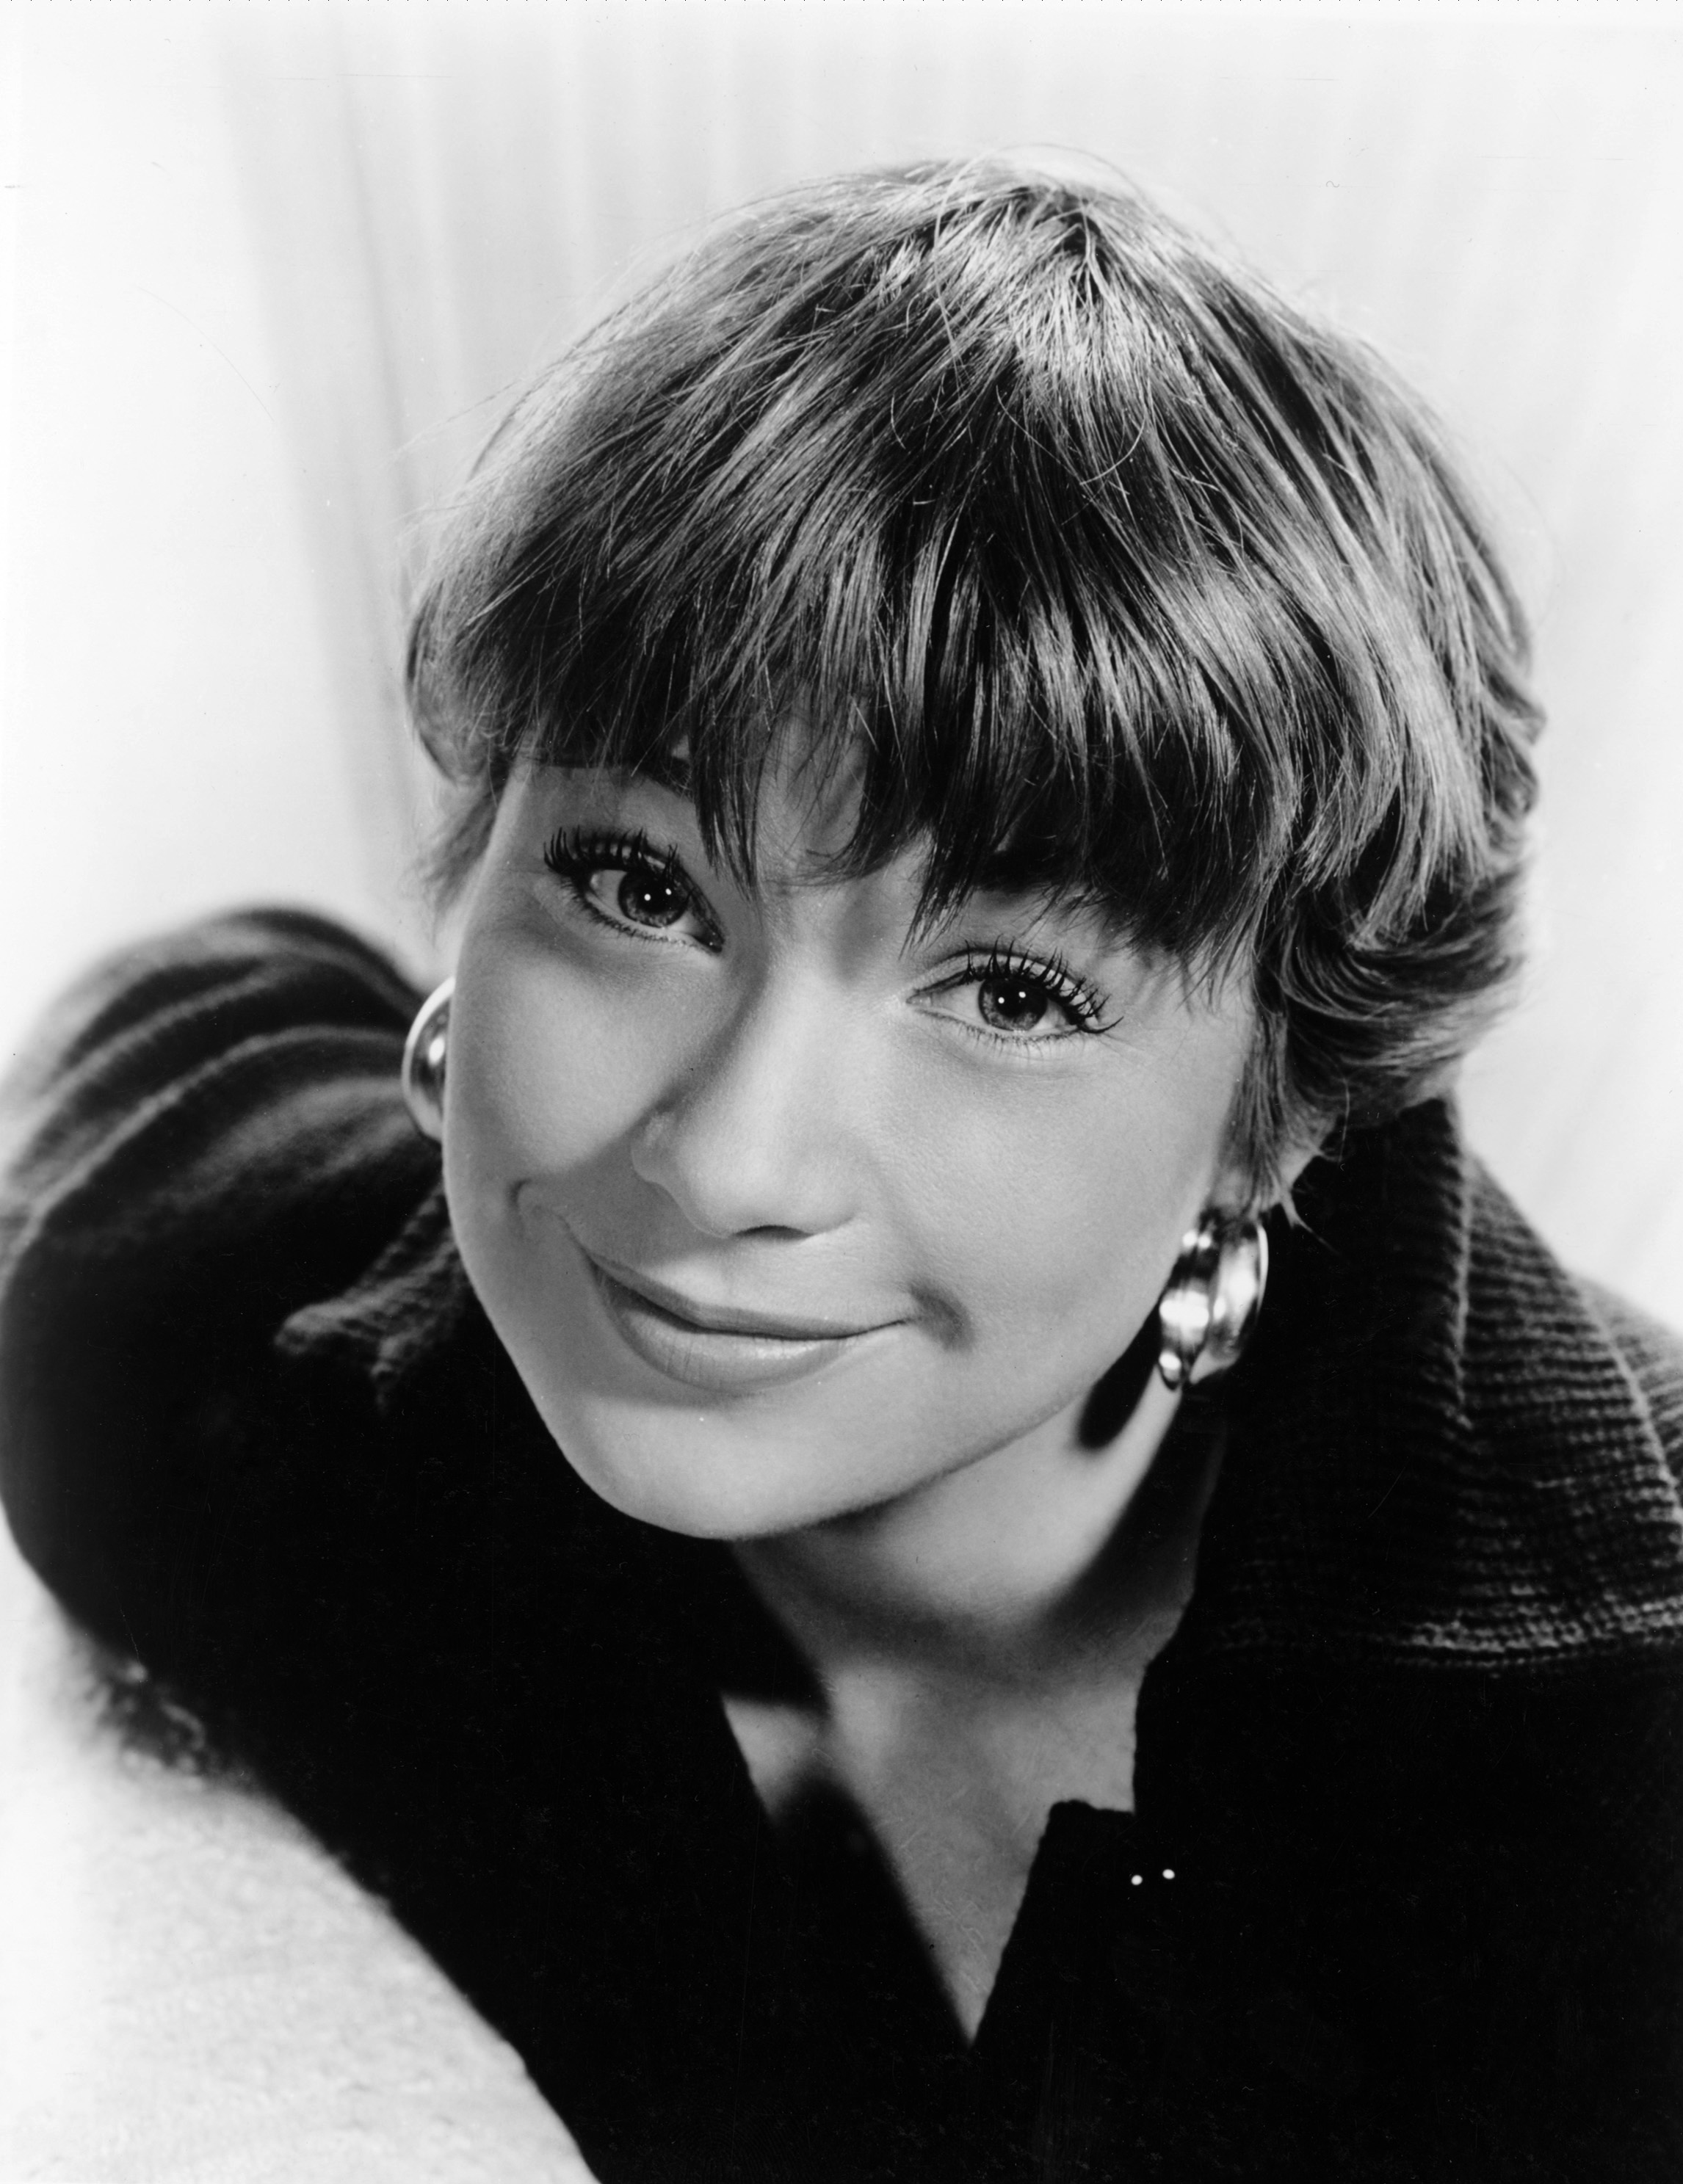 Shirley Maclaine photo 21 of 26 pics, wallpapers.